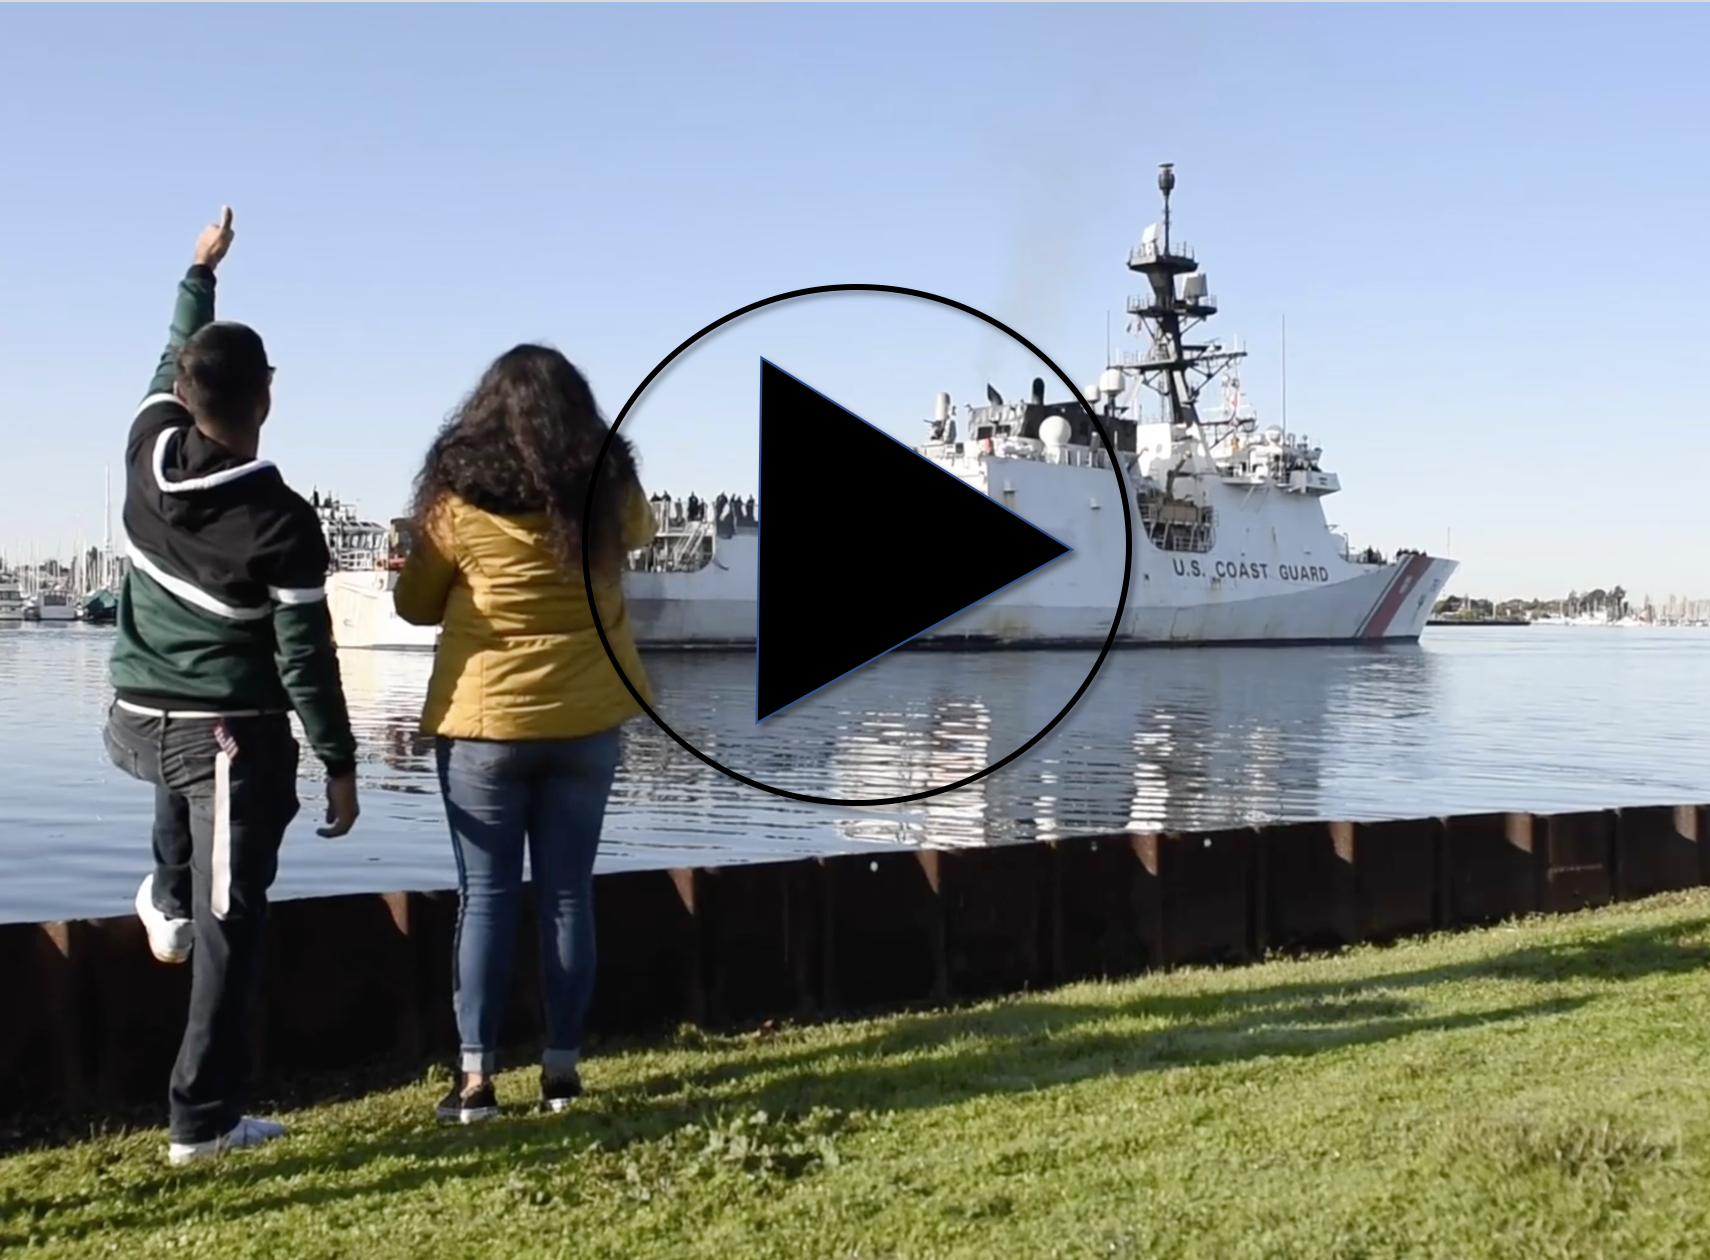 VIDEO: The Coast Guard Cutter Bertholf returns home from 82-day counter-narcotic patrol, $100M worth in cocaine seized